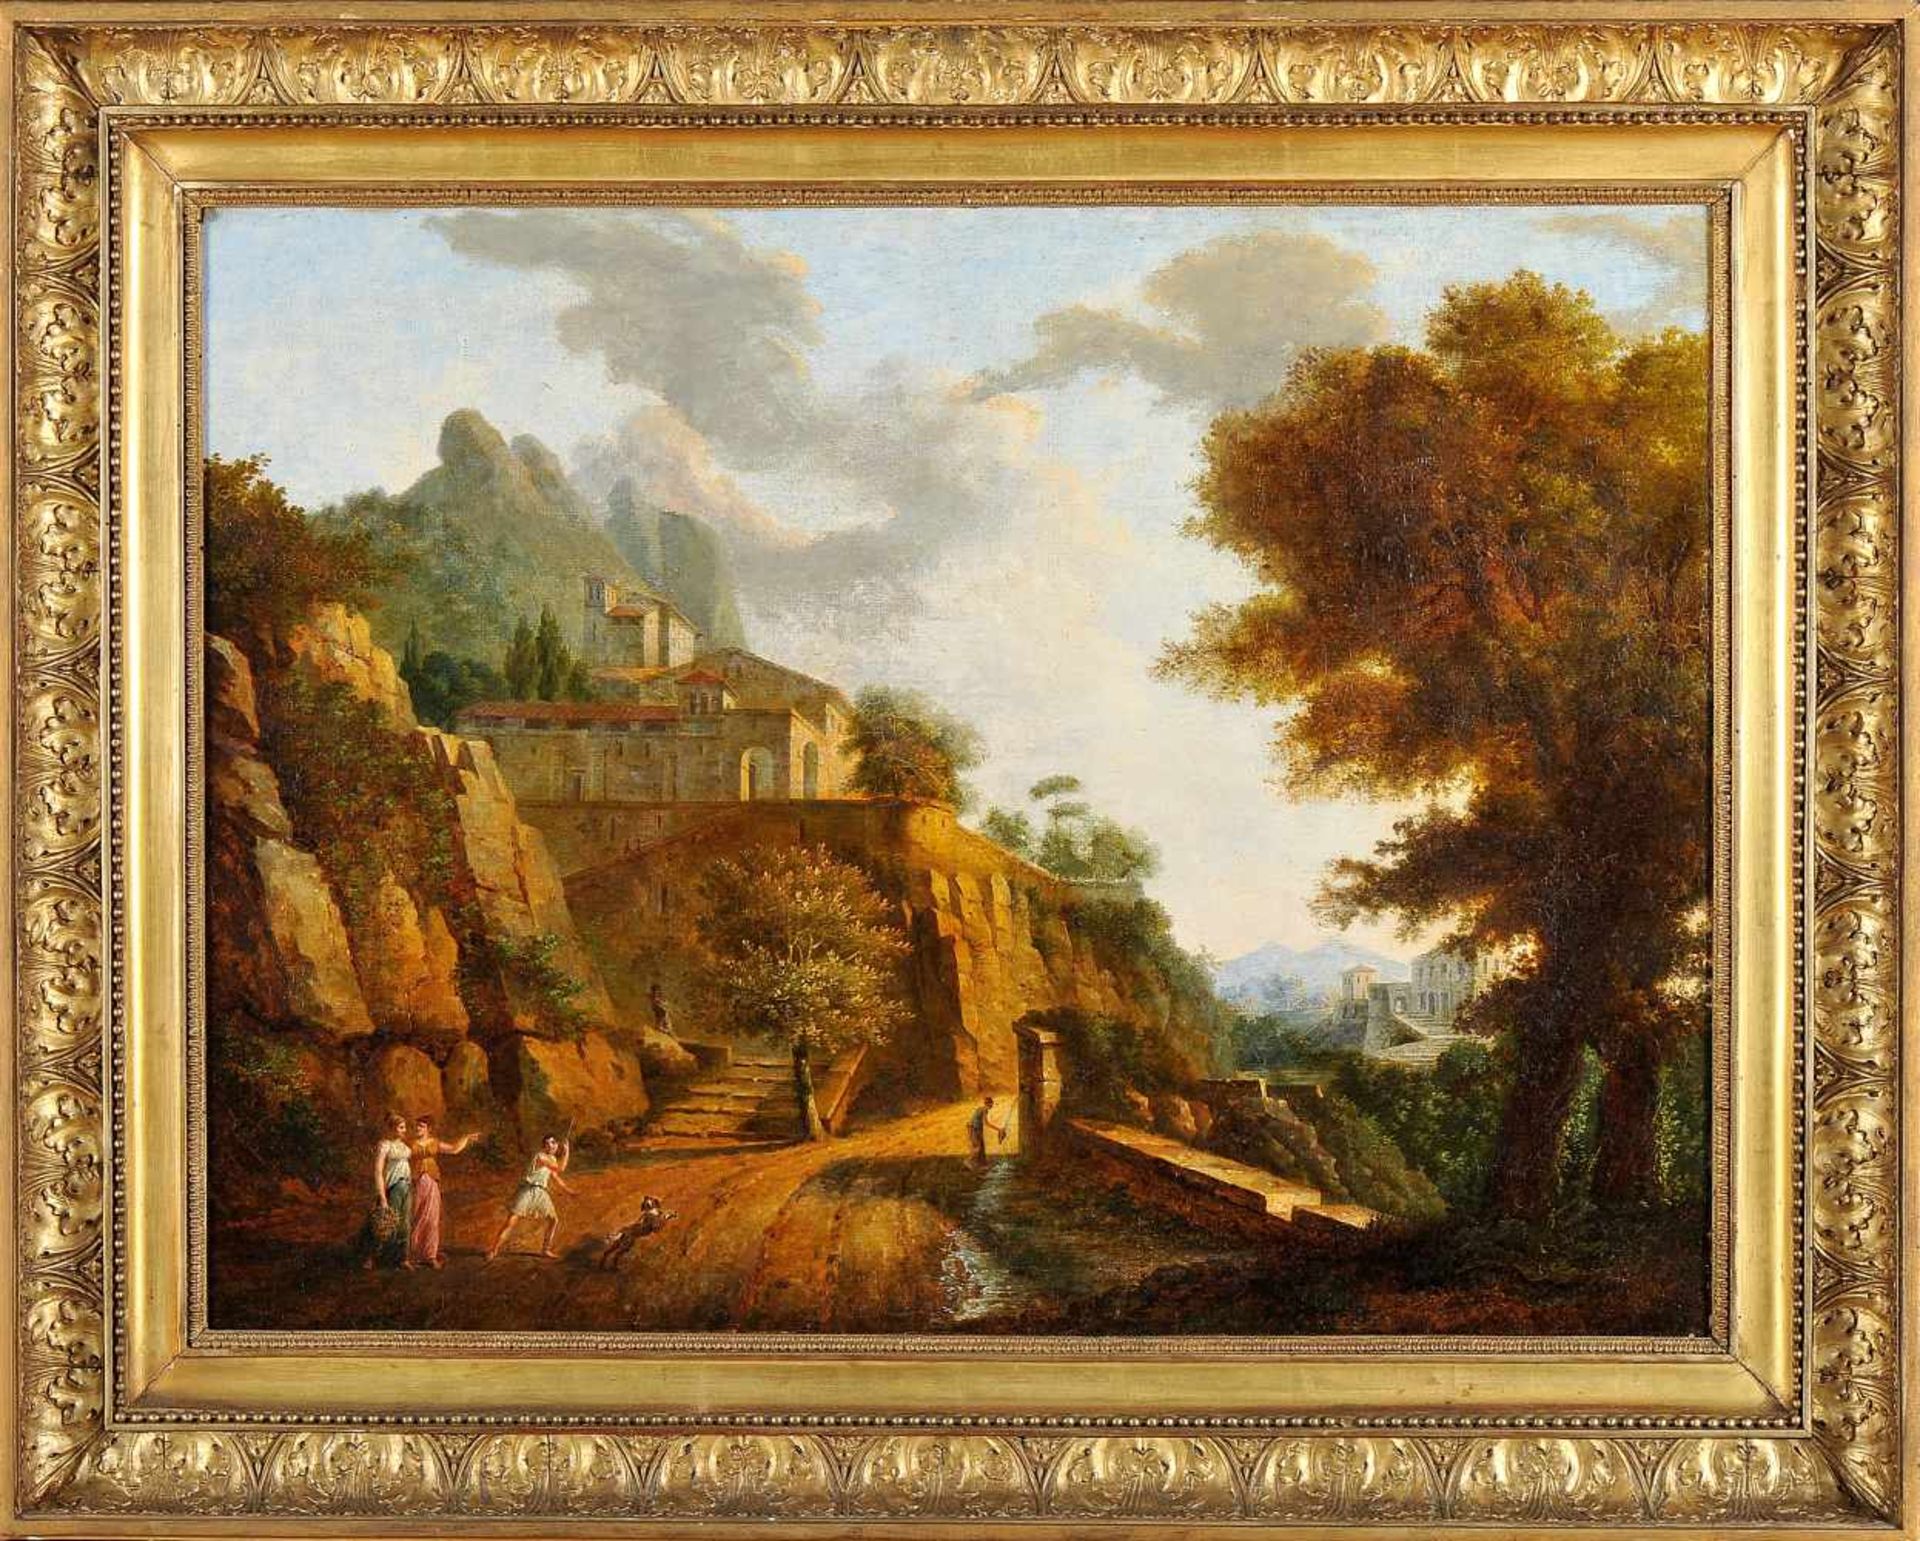 Landscape with figures and houses